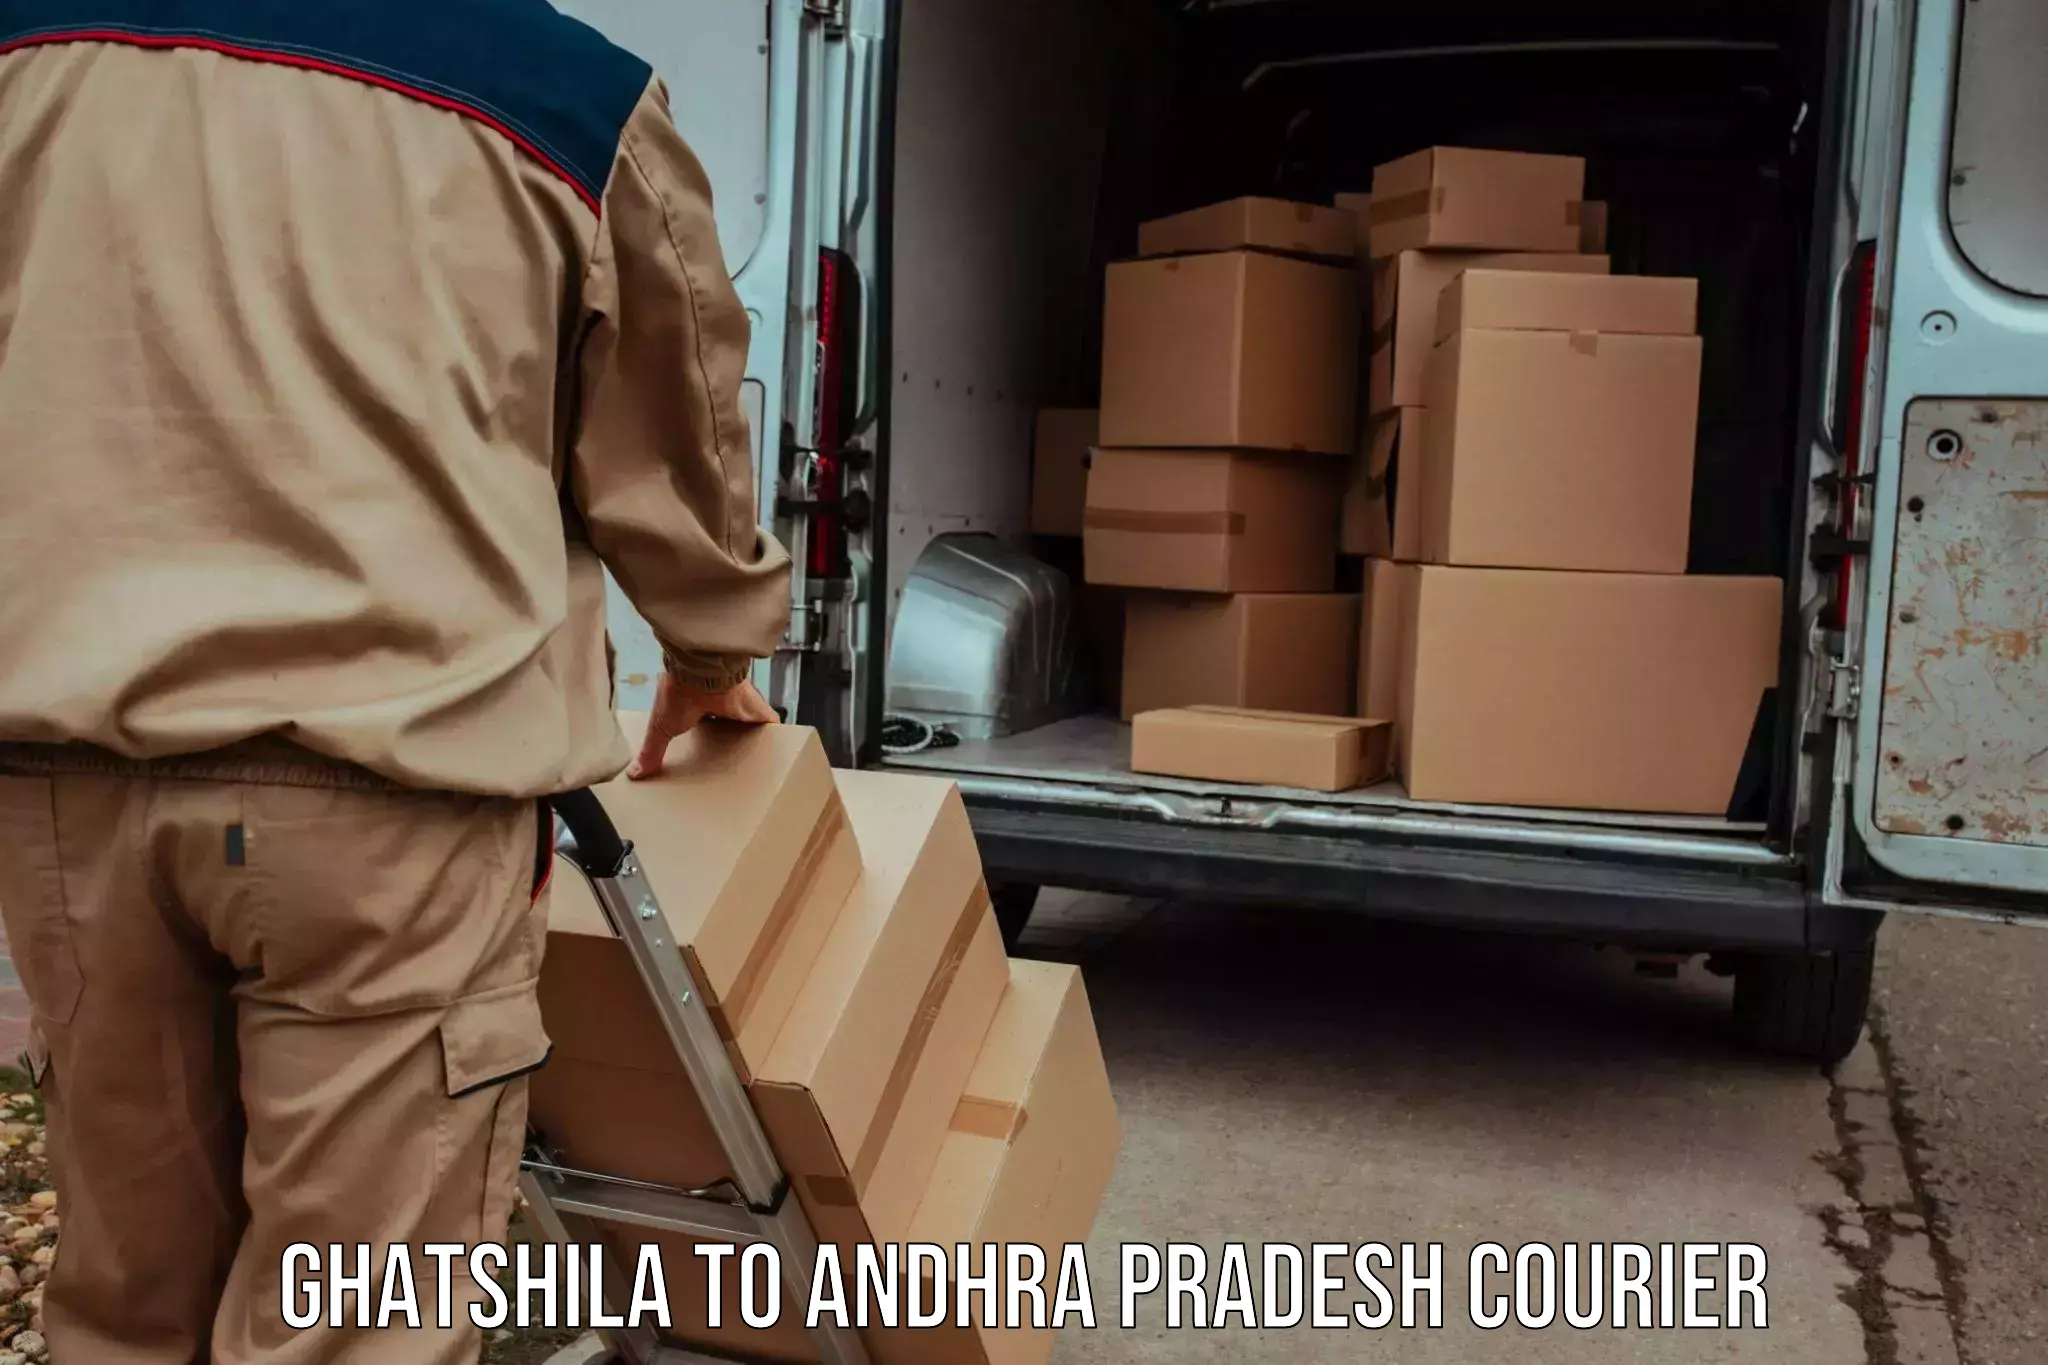 24/7 courier service in Ghatshila to Badvel